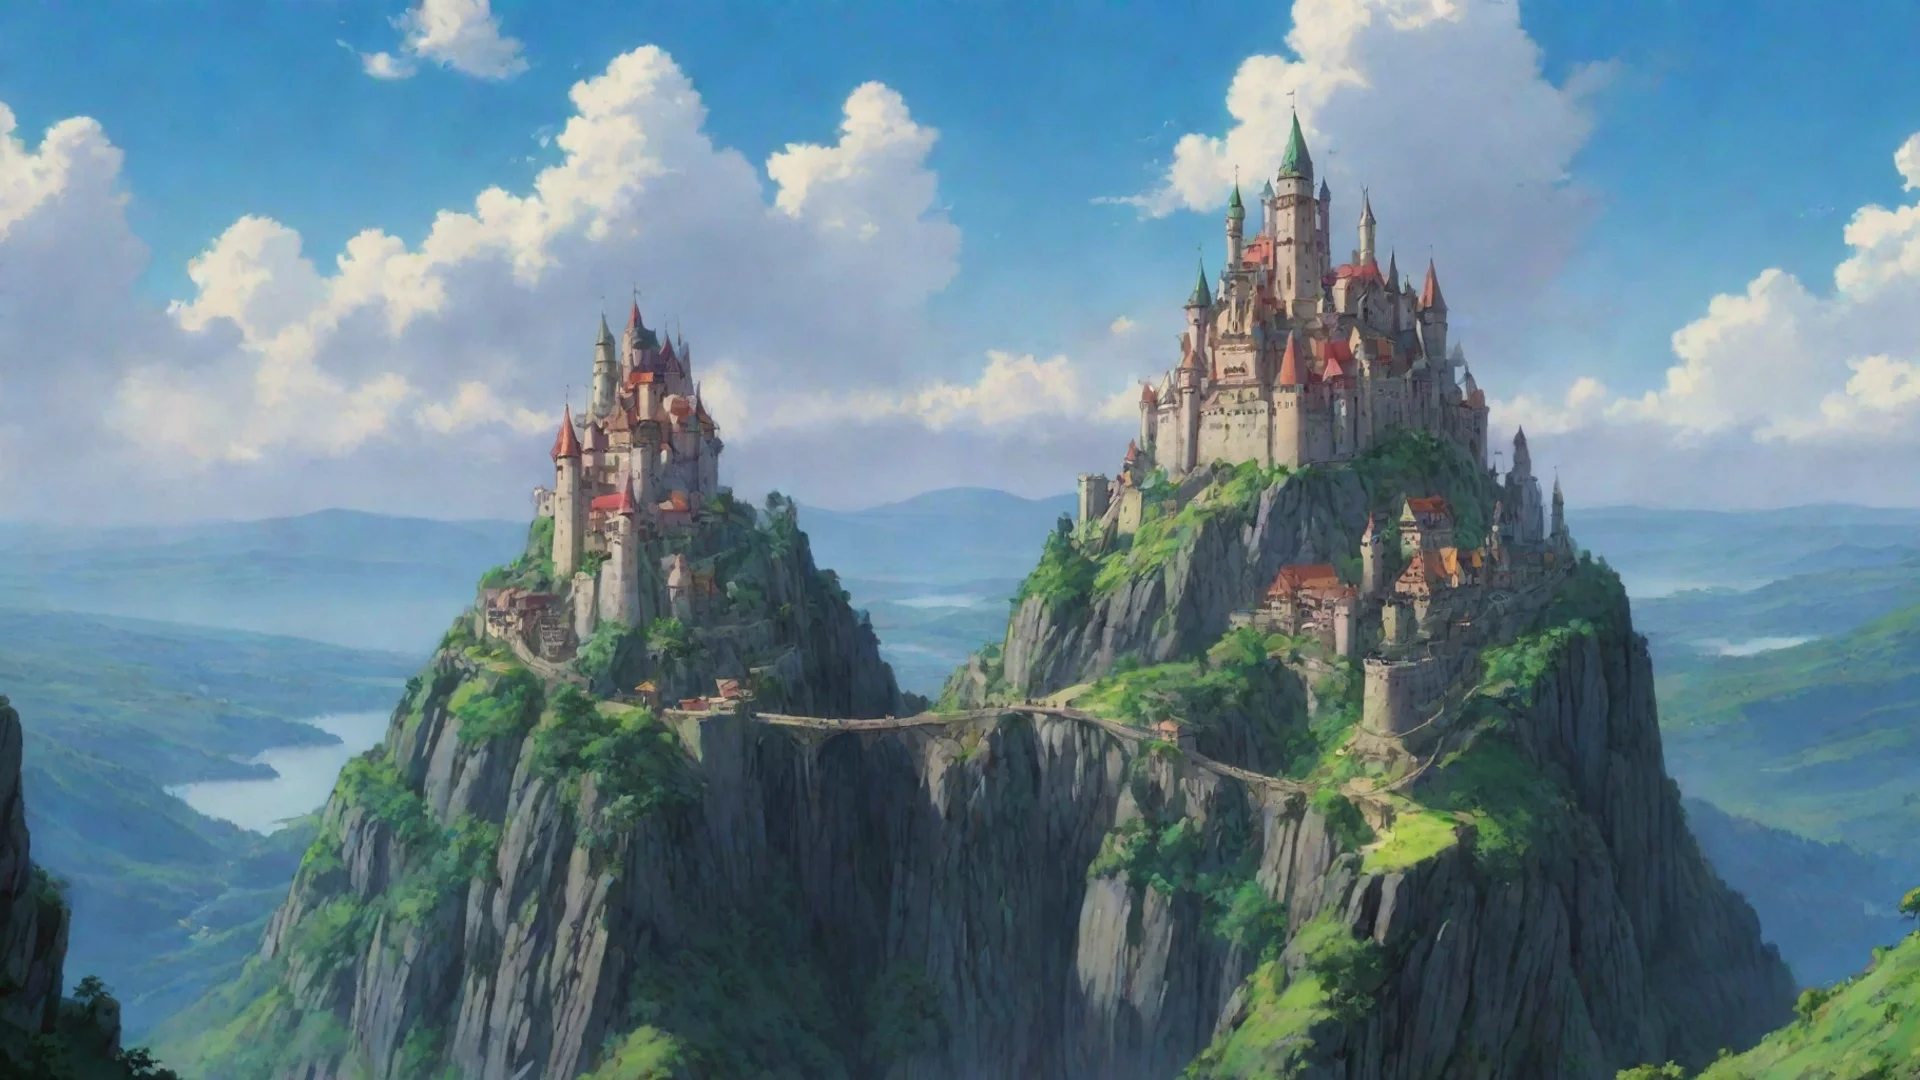 amazing kingdom of heaven ghibli amazing environment colorful extreme lovely awesome portrait 2 wide